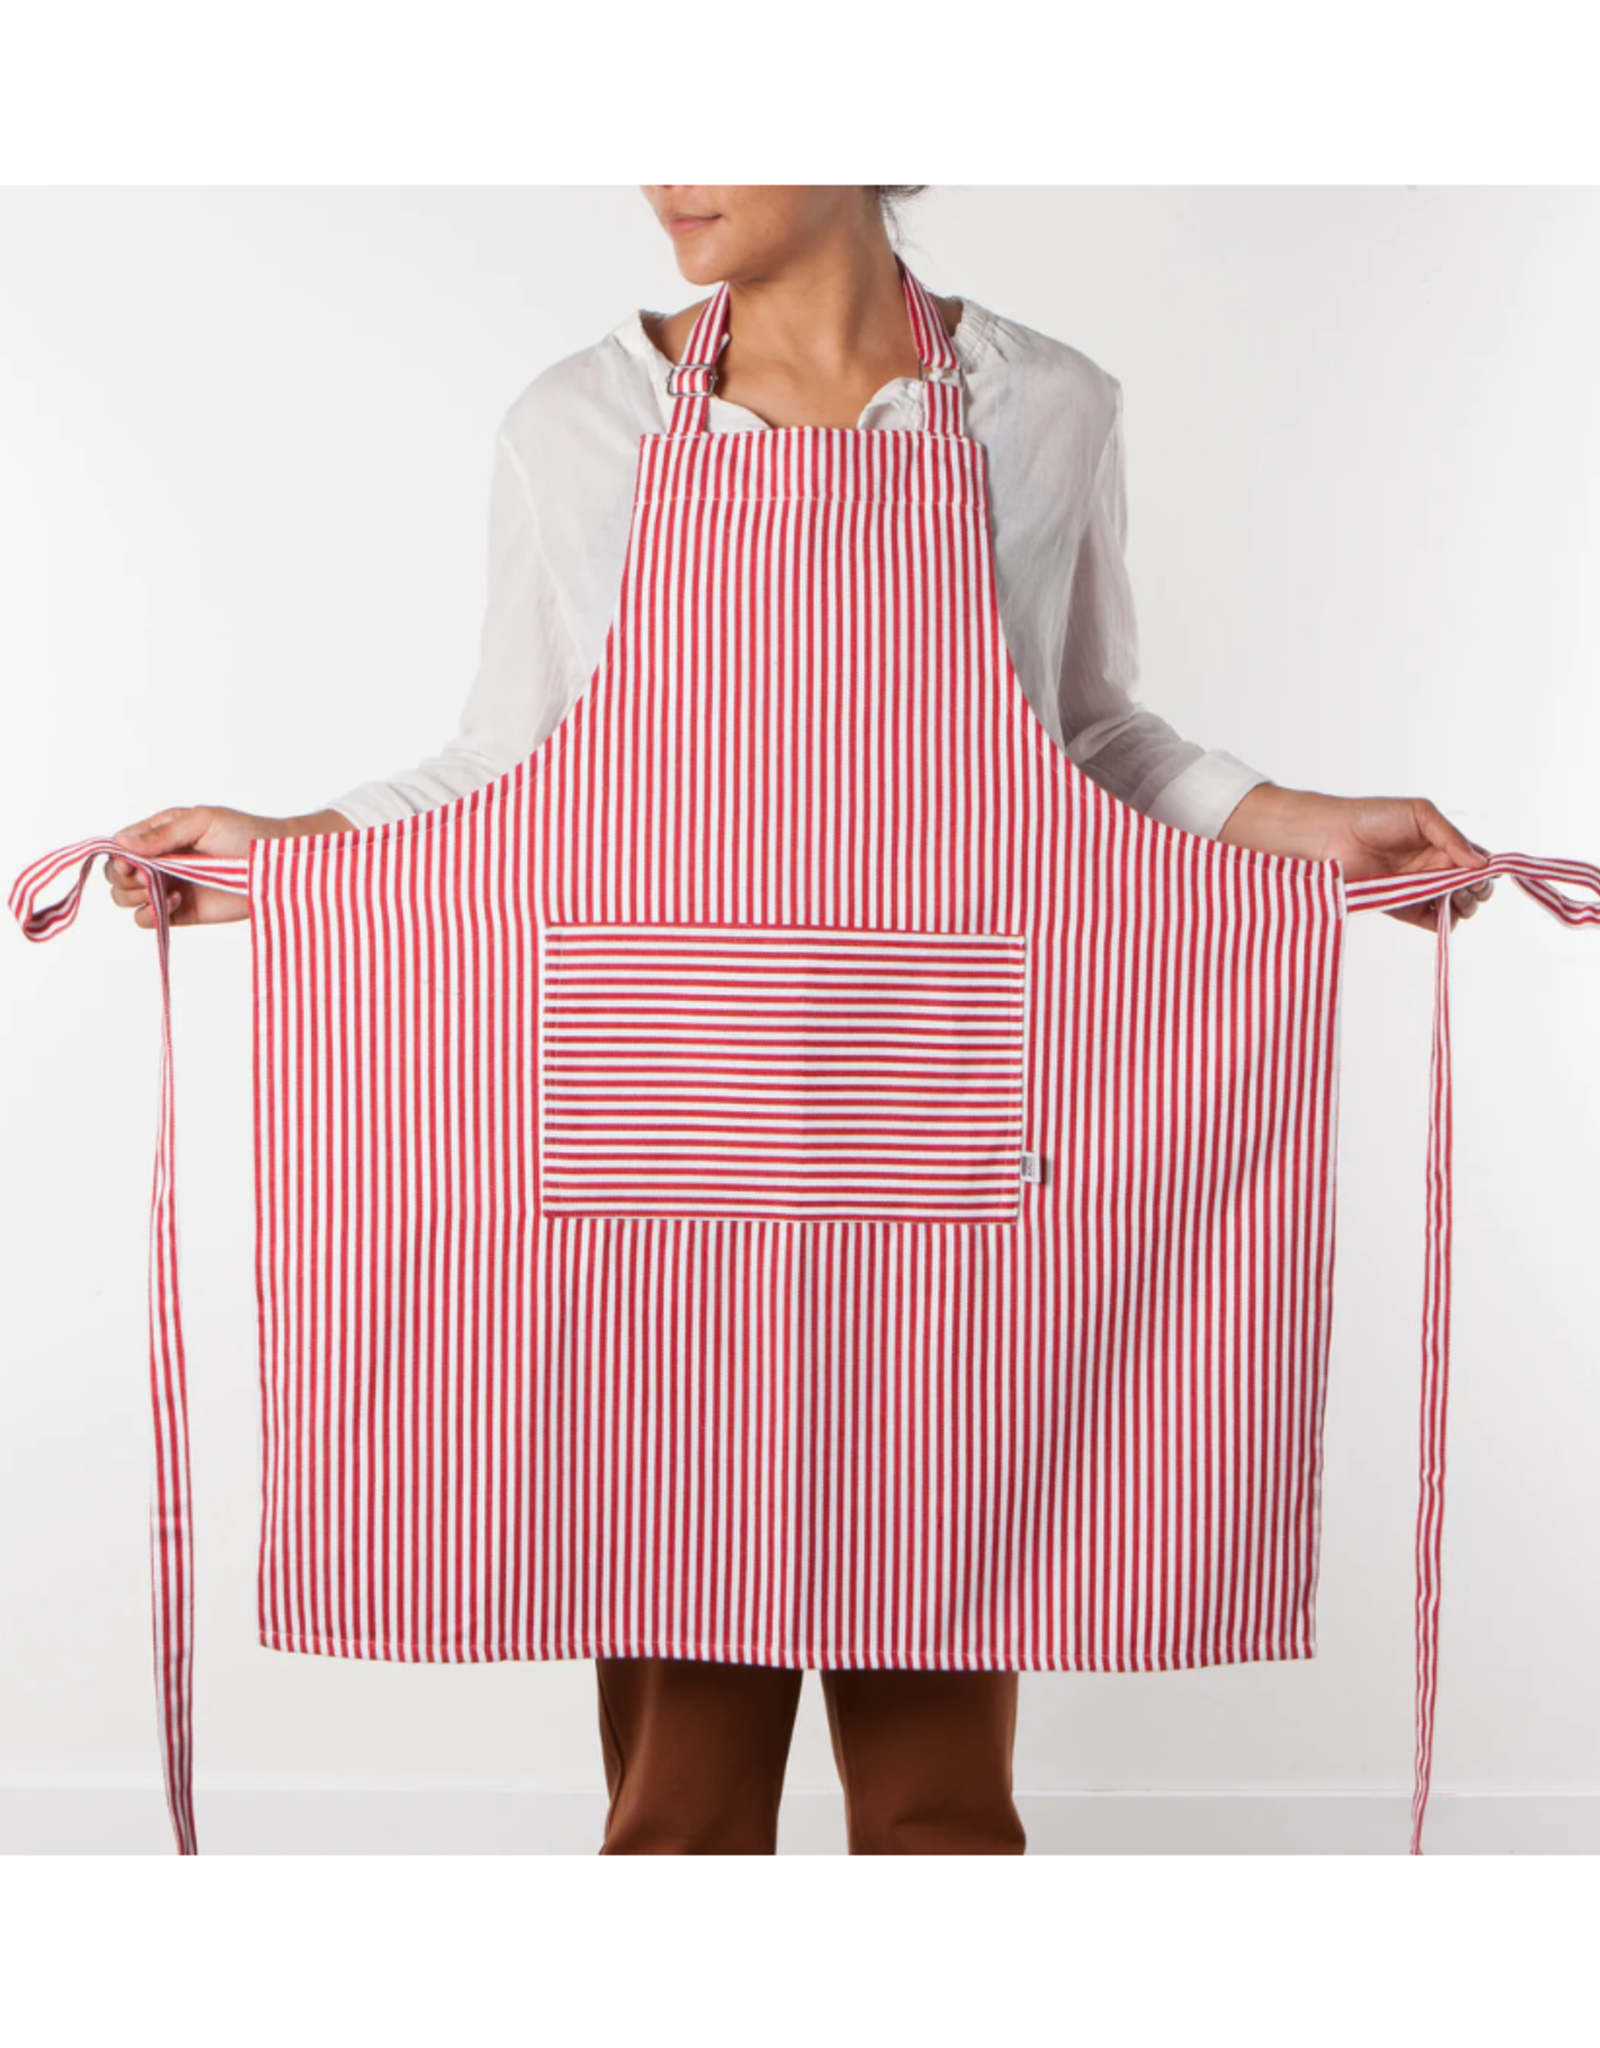 DCA - Classic Apron / Pinstripe, Red